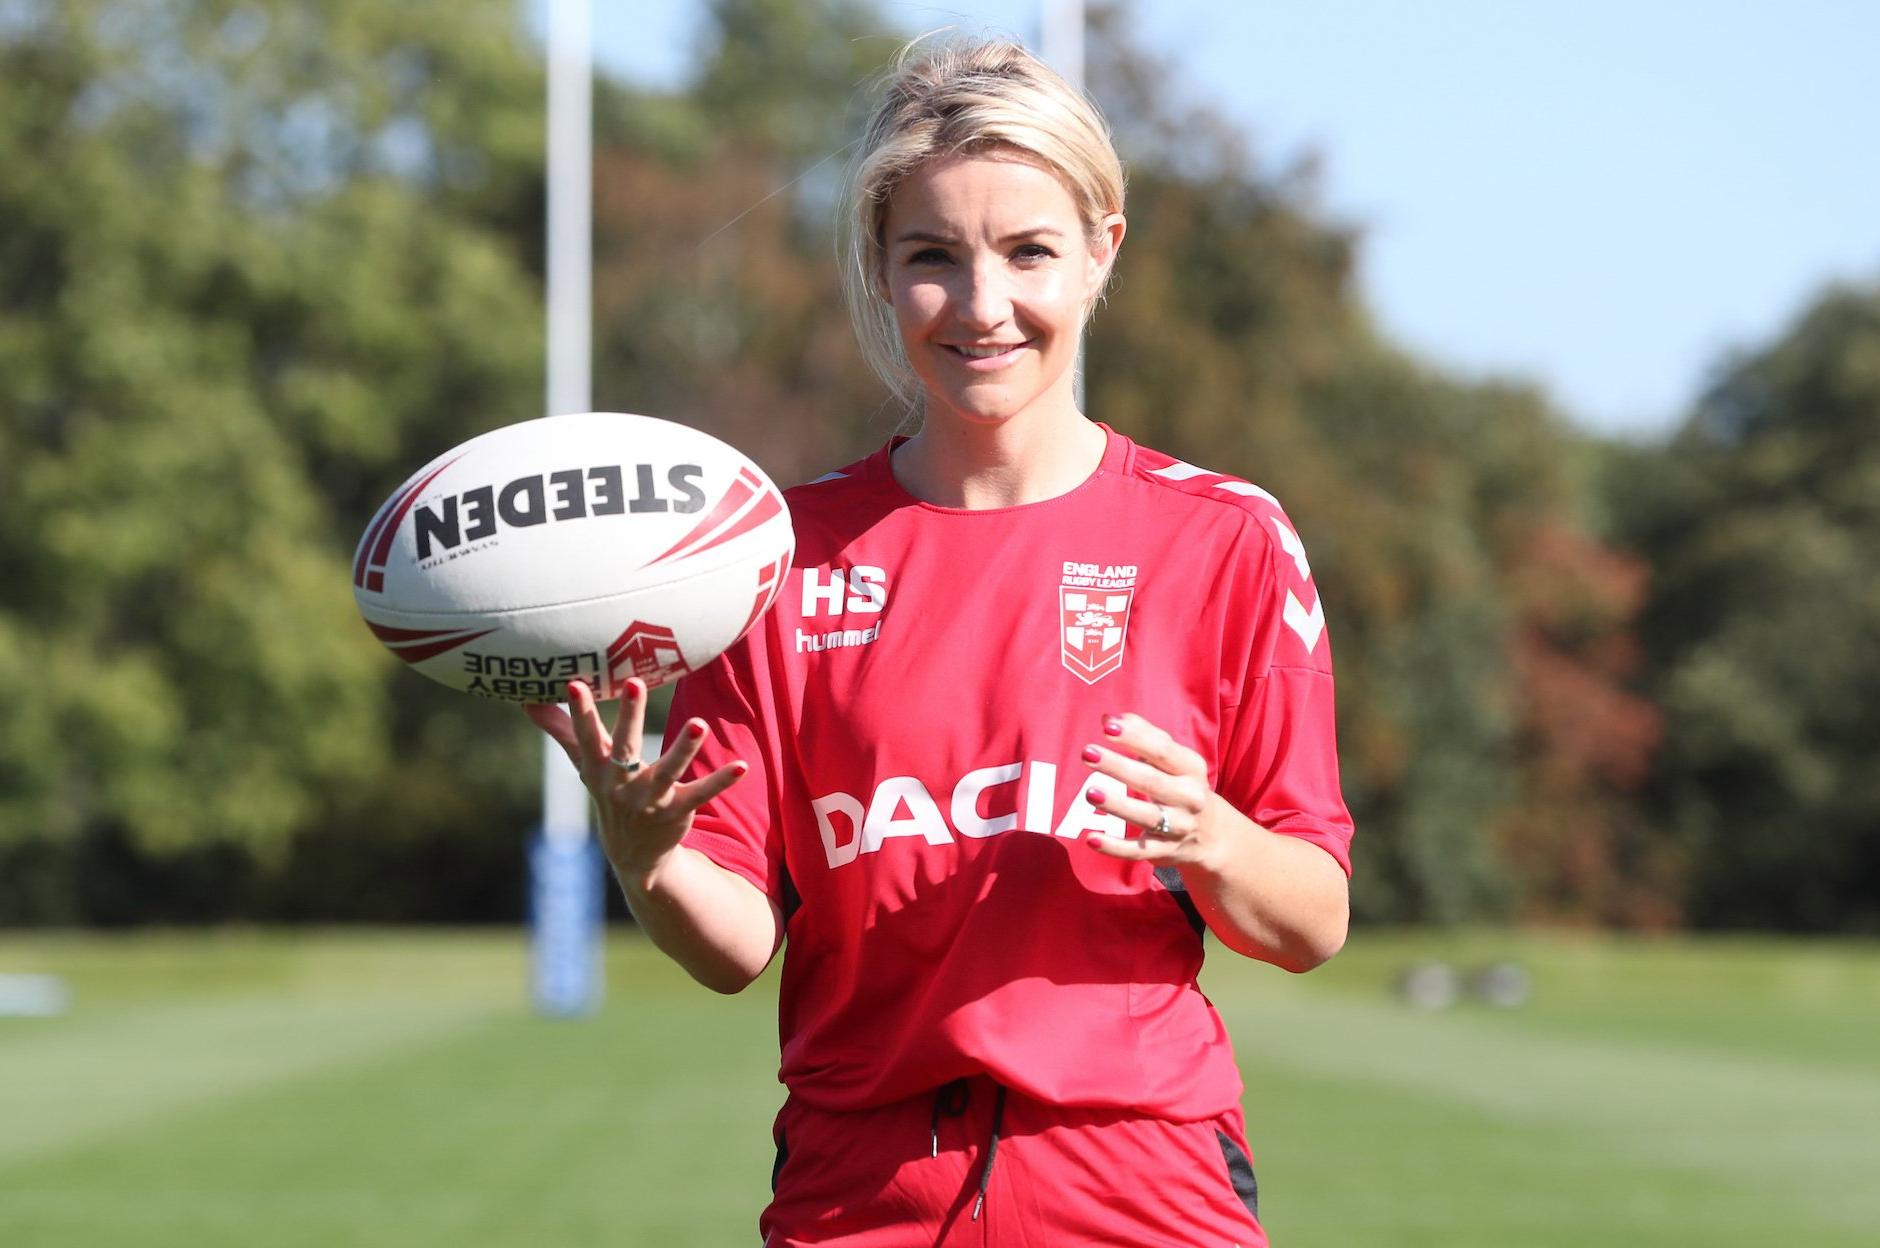 Leeds Rhinos v Warrington Helen Skelton to be a presenter on Channel 4s coverage of Super League